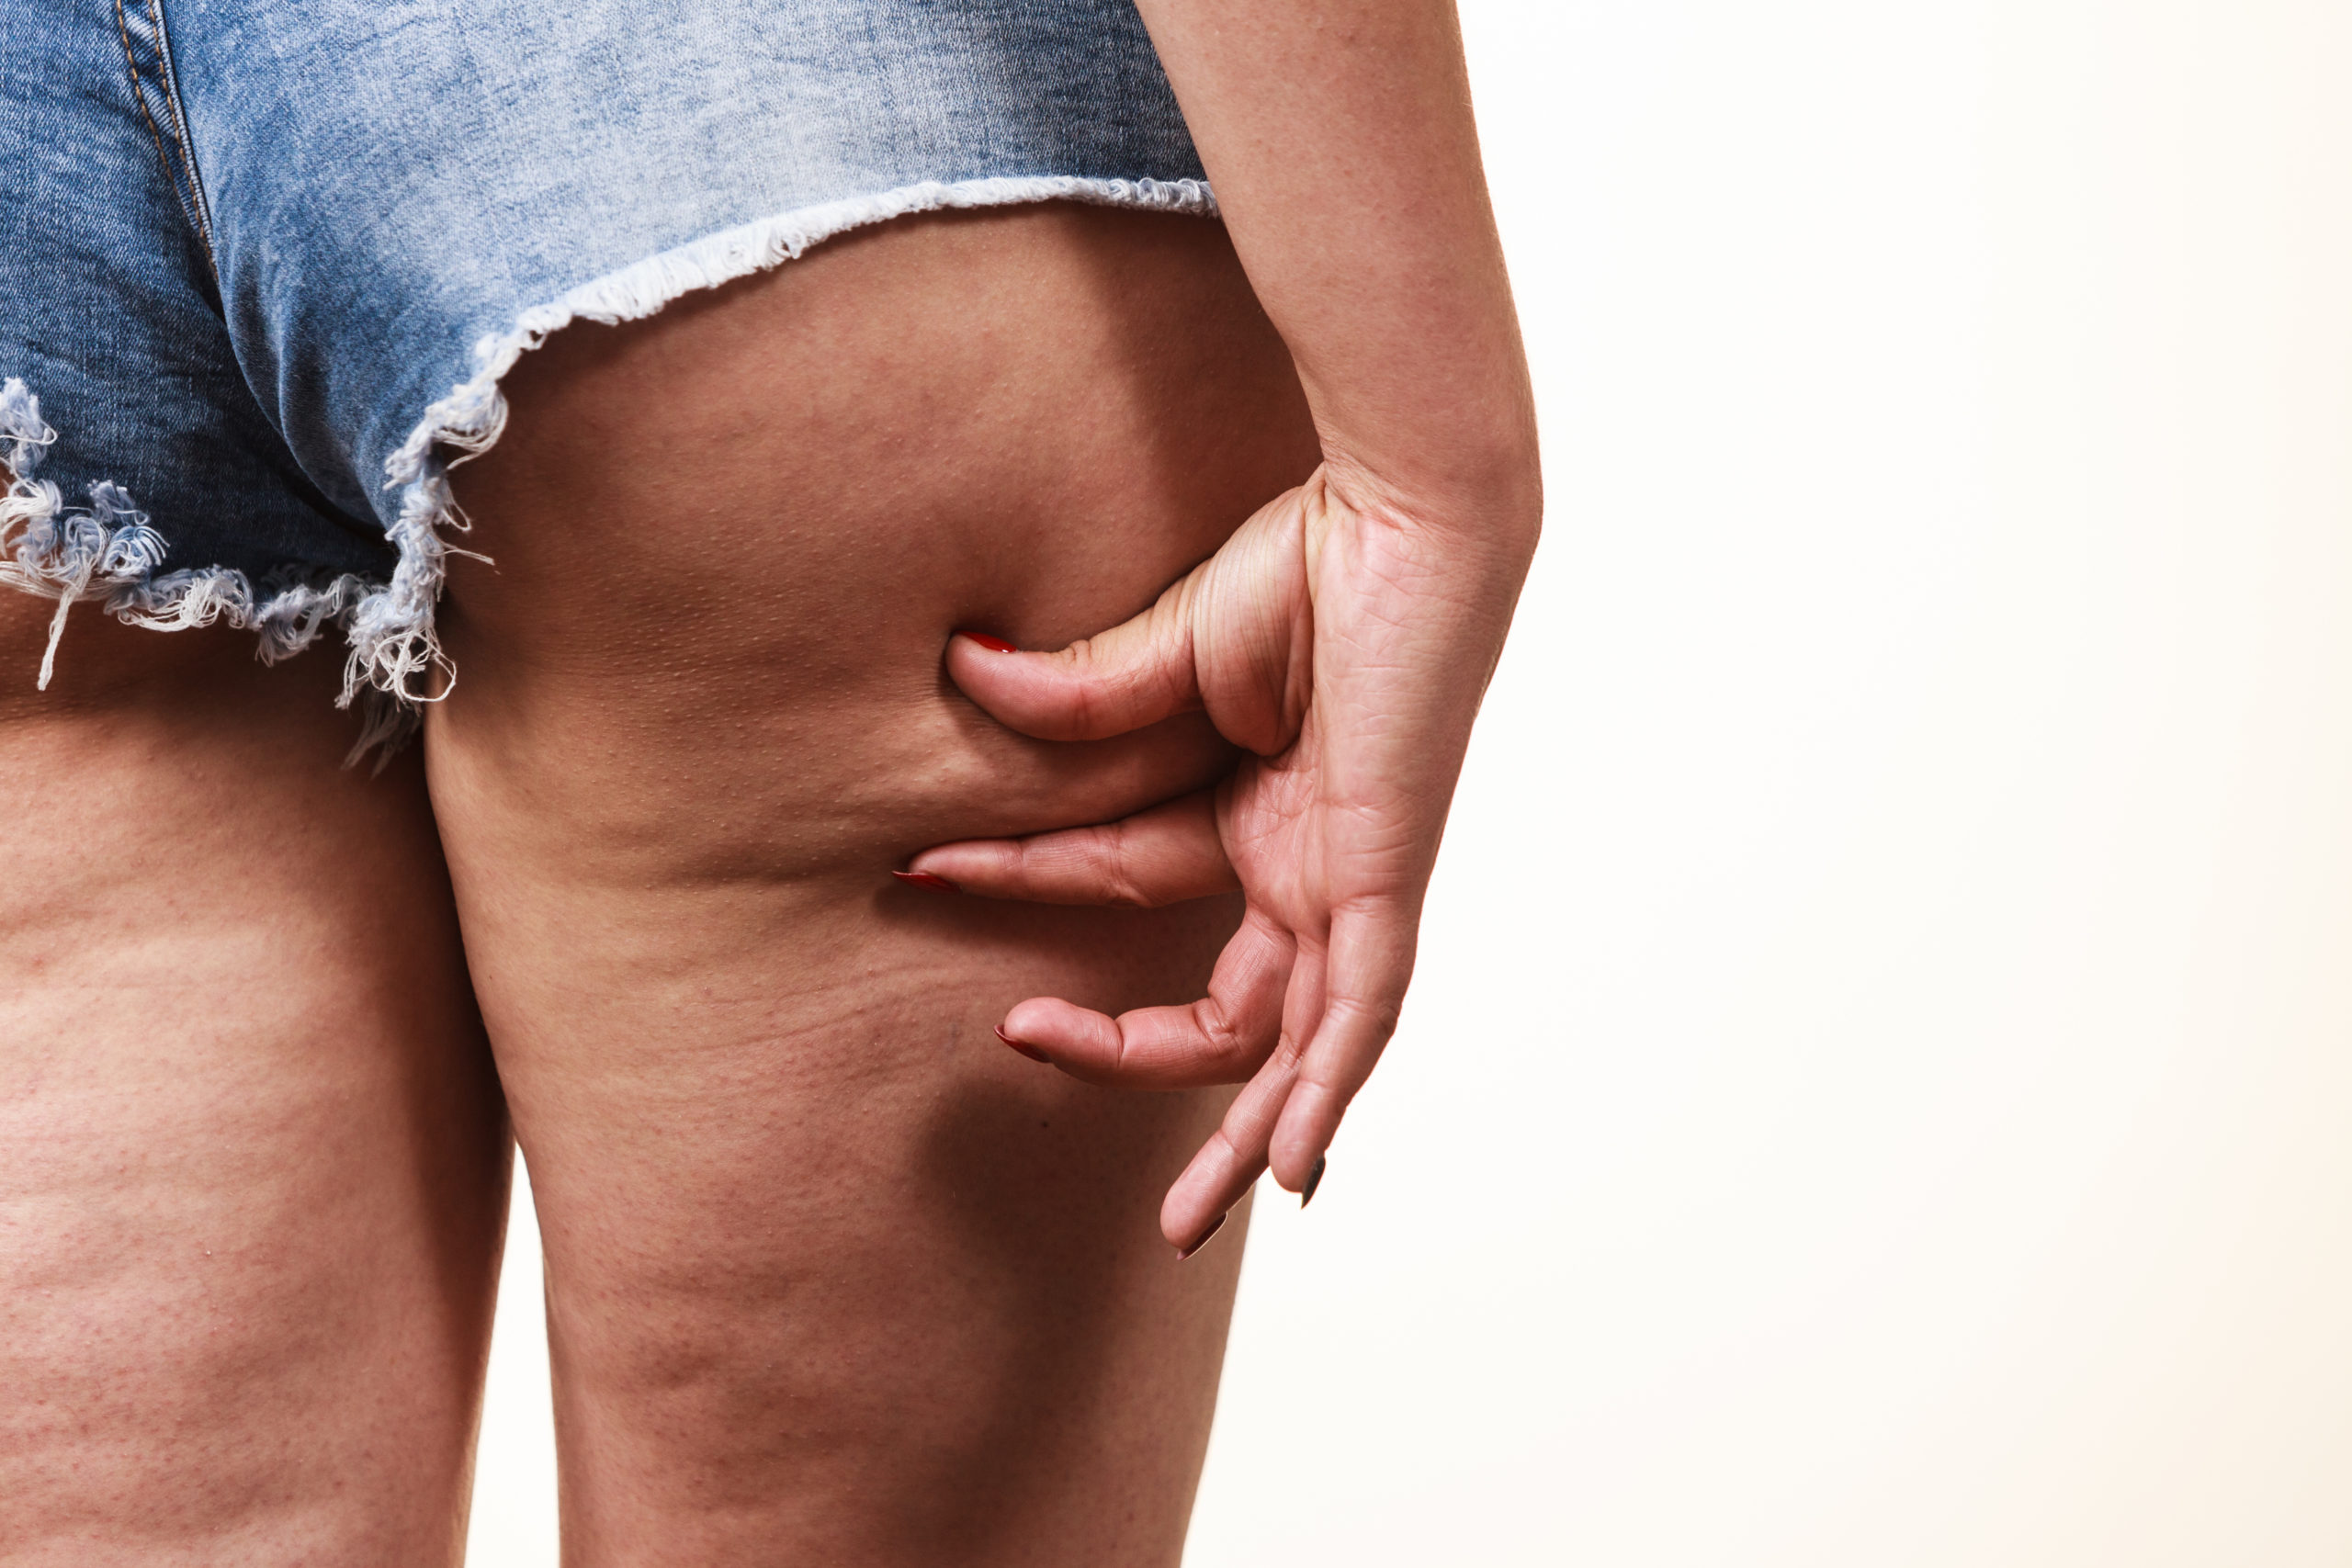 What Factors Contribute to Cellulite?